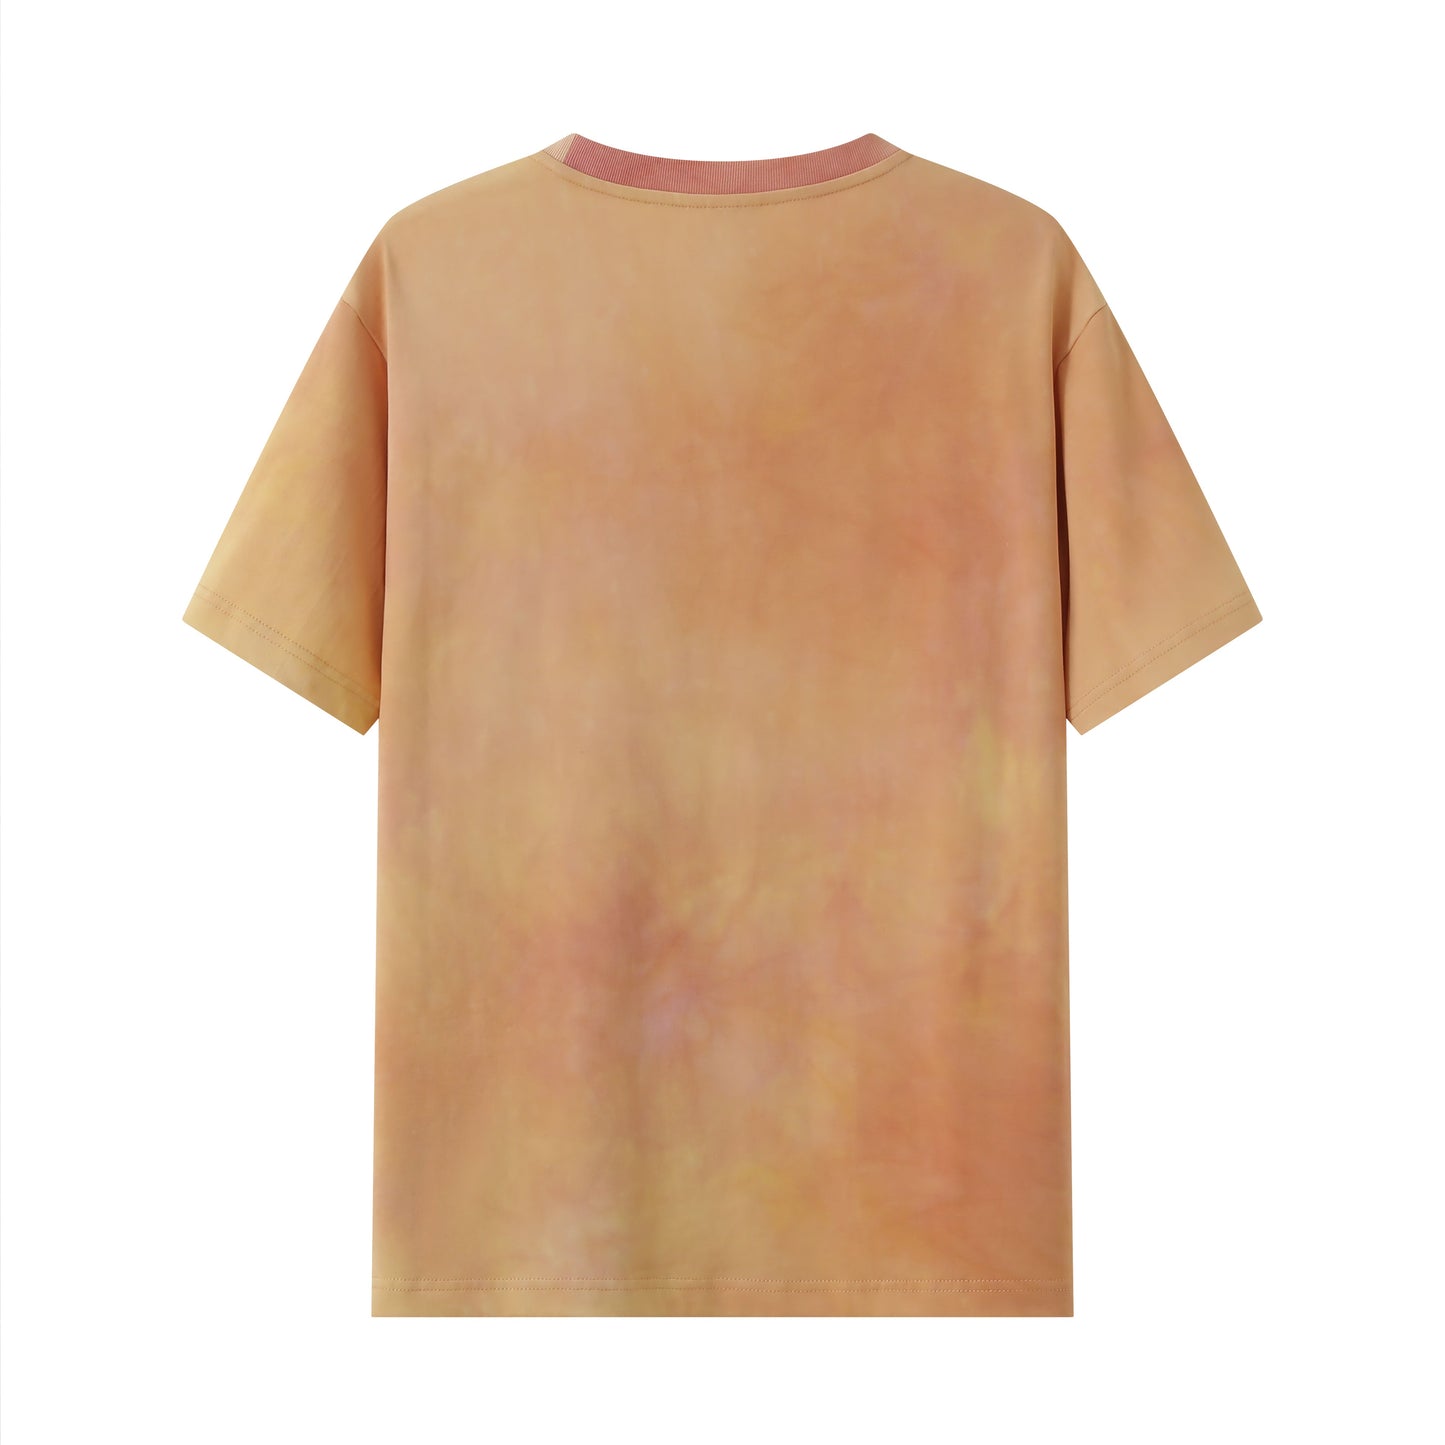 PLANT DYED GRAFFITI LOGO T-SHIRT APRICOT FOR HER